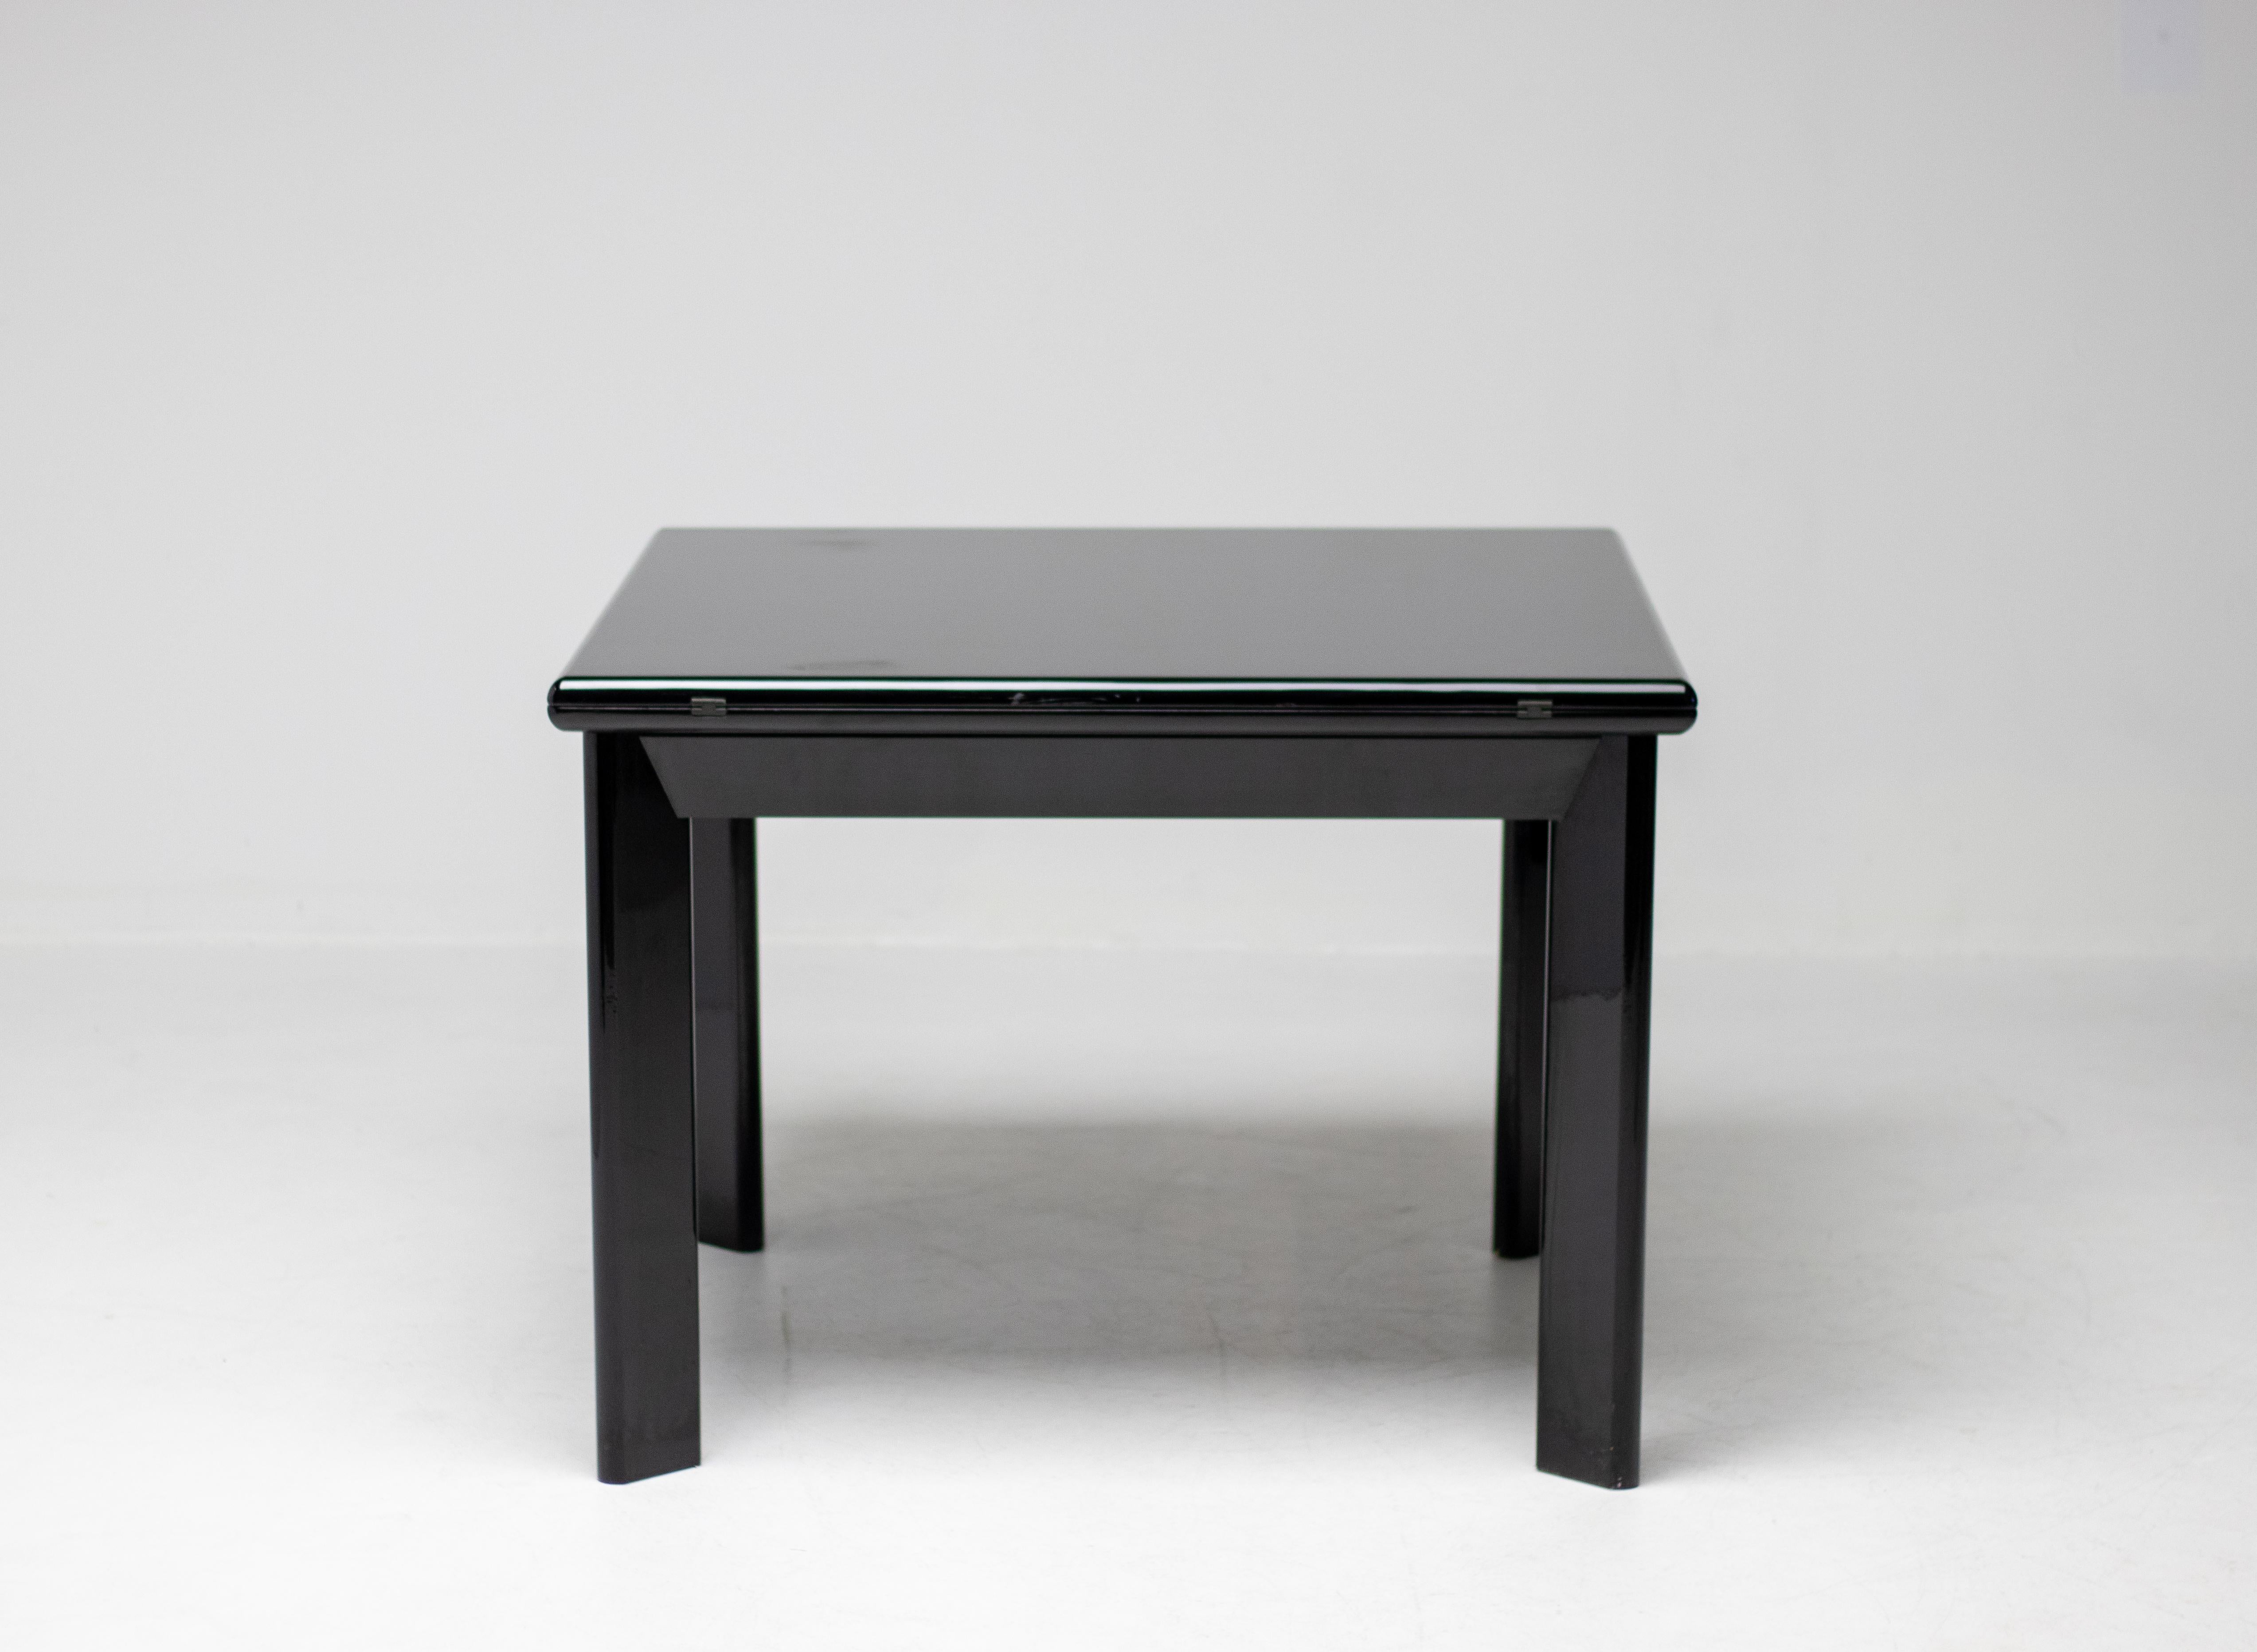 Rare early black lacquered square table by Kazuhide Takahama for Simon International that folds out to a rectangular table when desired. Magnificent lacquer quality, refined attention to detail and a very practical design by the renown Japanese